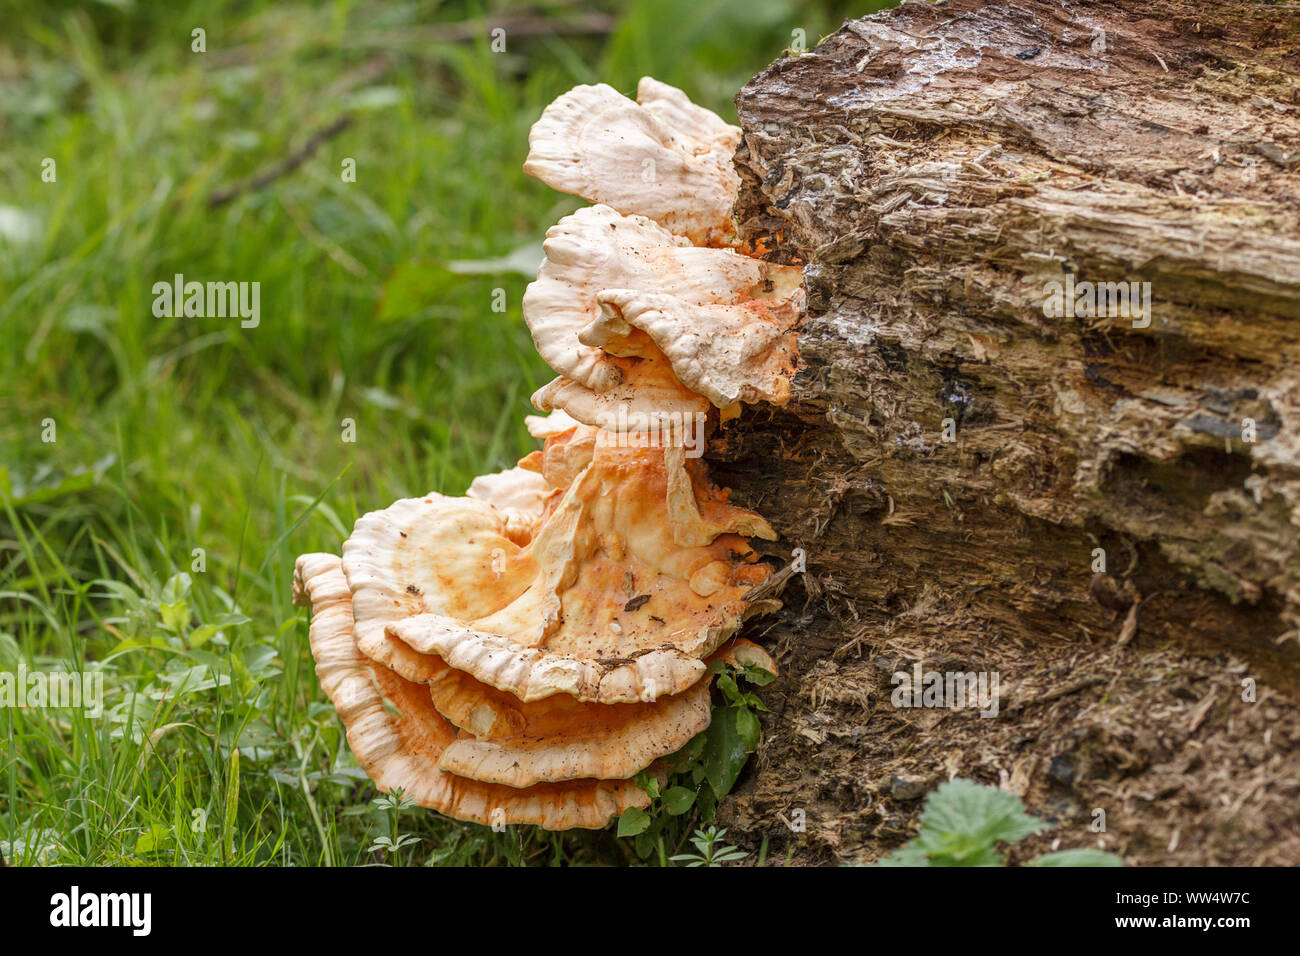 Sulphur polypore fungi chicken of the woods Laetiporus sulphureus large creamy yellow tiers with frilly ruffled edges cascade down from rotting log Stock Photo